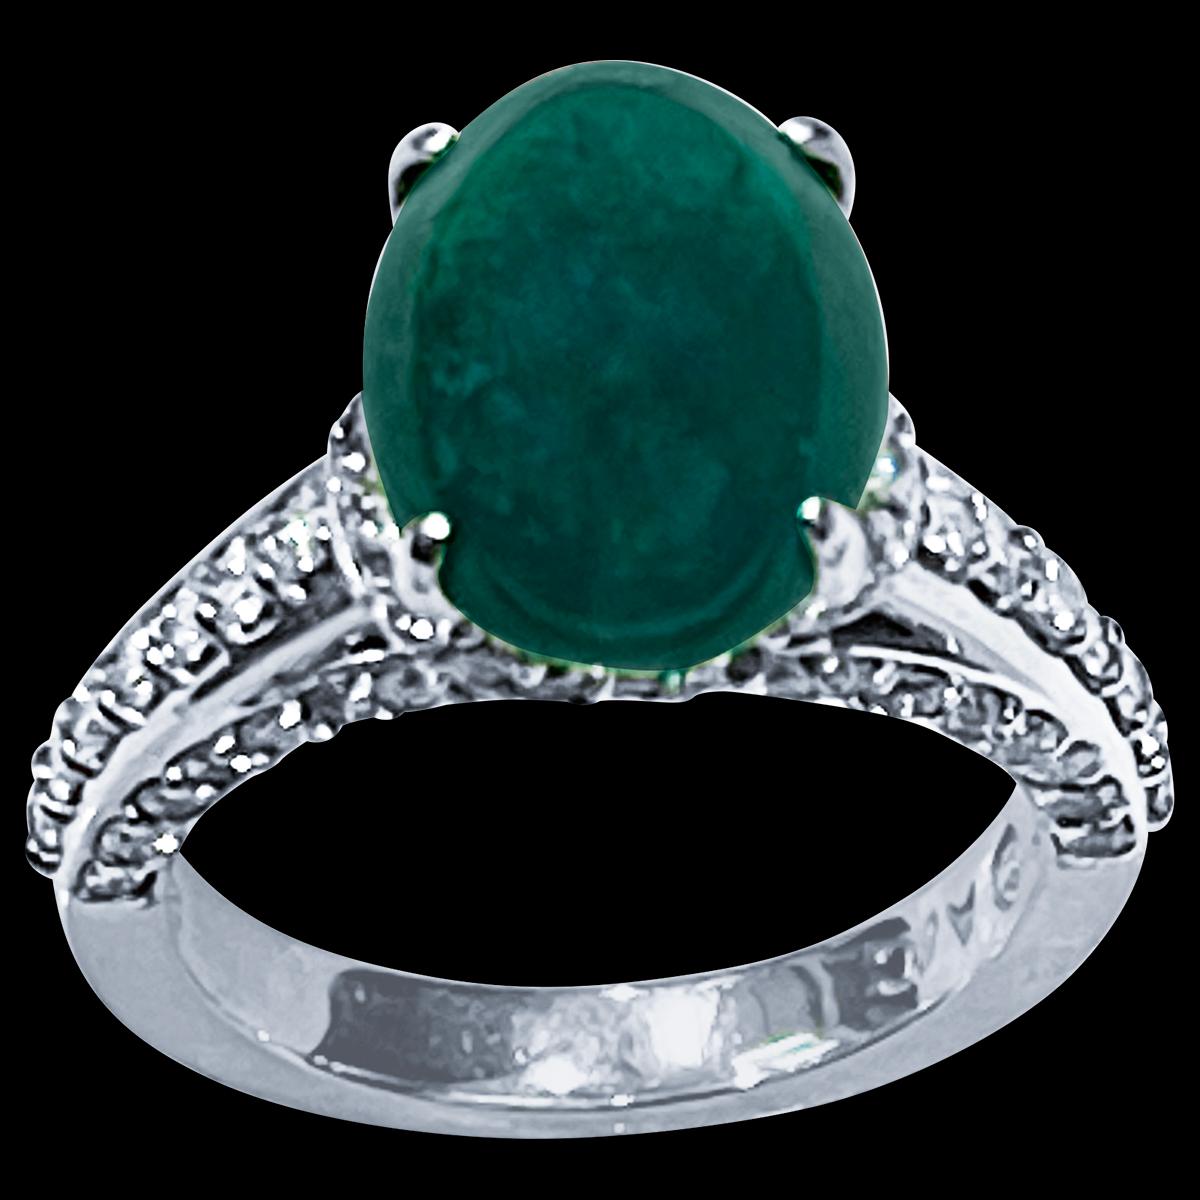 A classic, Cocktail ring 
5 Carat Zambian Emerald Cabochon & Diamond Cocktail  Ring 14 Karat White Gold with diamond  on the band  , Estate with no color enhancement. 
Gold: 14 Karat  White  gold ,
Weight: 7.2 gram with stone 
Diamond approximately